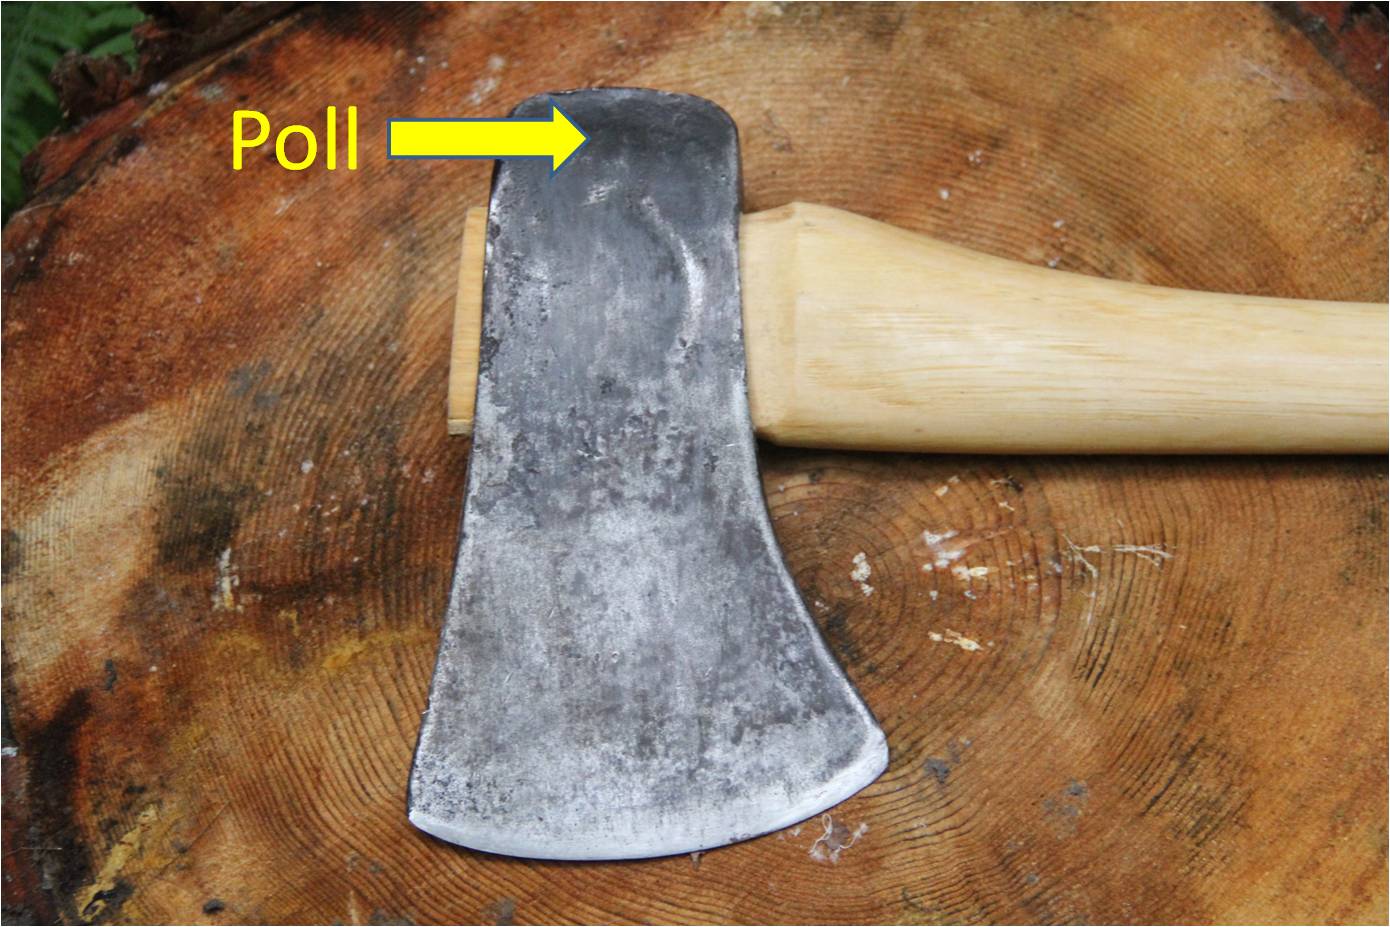 Choosing The Best Wood for Axe Handle